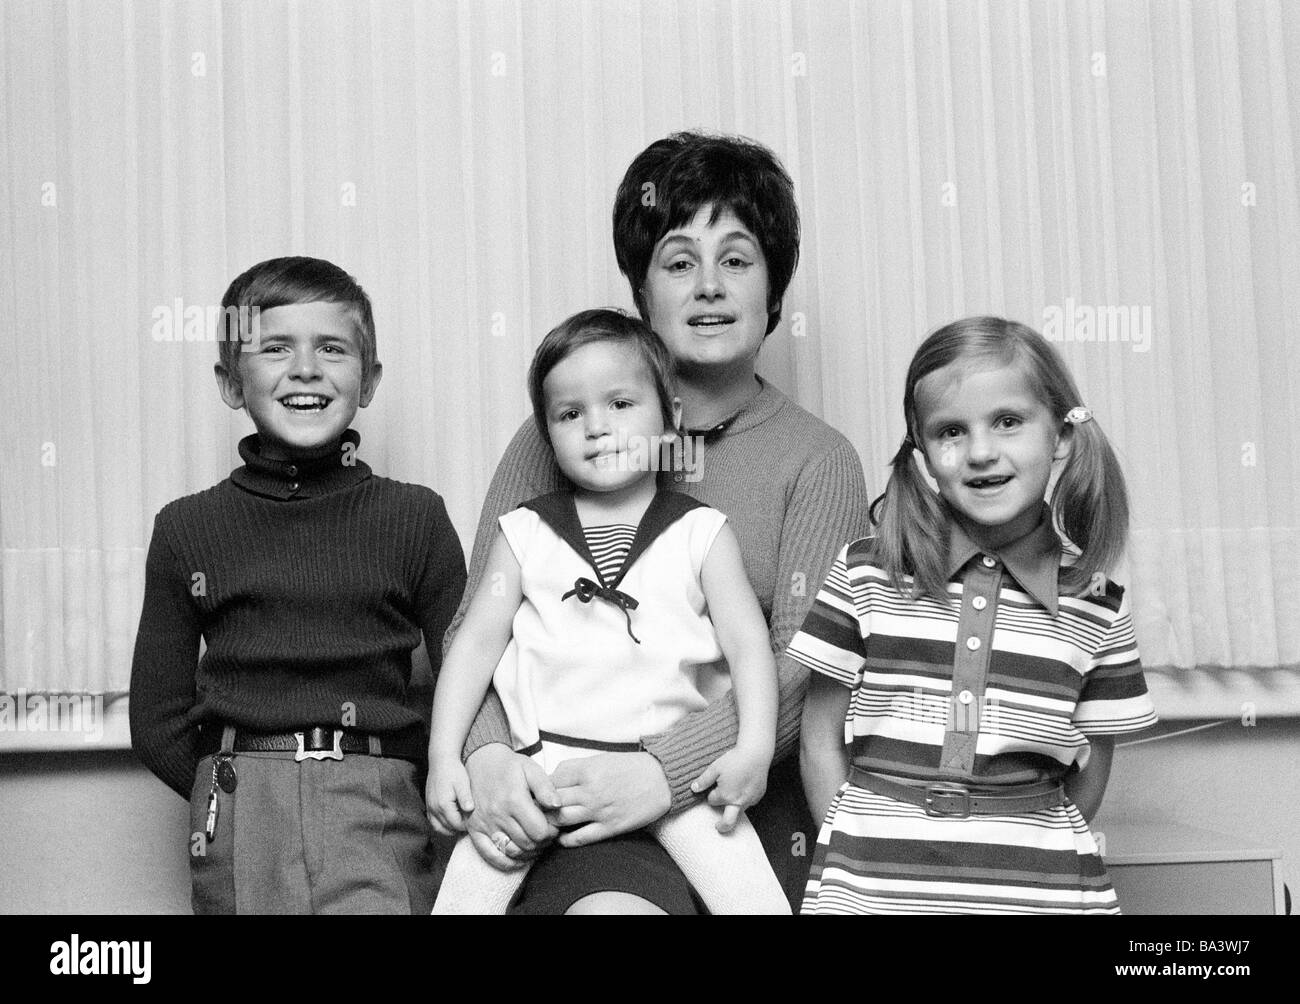 Seventies, black and white photo, people, mother and three children posing, woman, aged 30 to 35 years, boy, aged 10 to 12 years, two girls, aged 3 to 4 years, aged 7 to 9 years, Doris, Frank, Andrea, Birgit Stock Photo